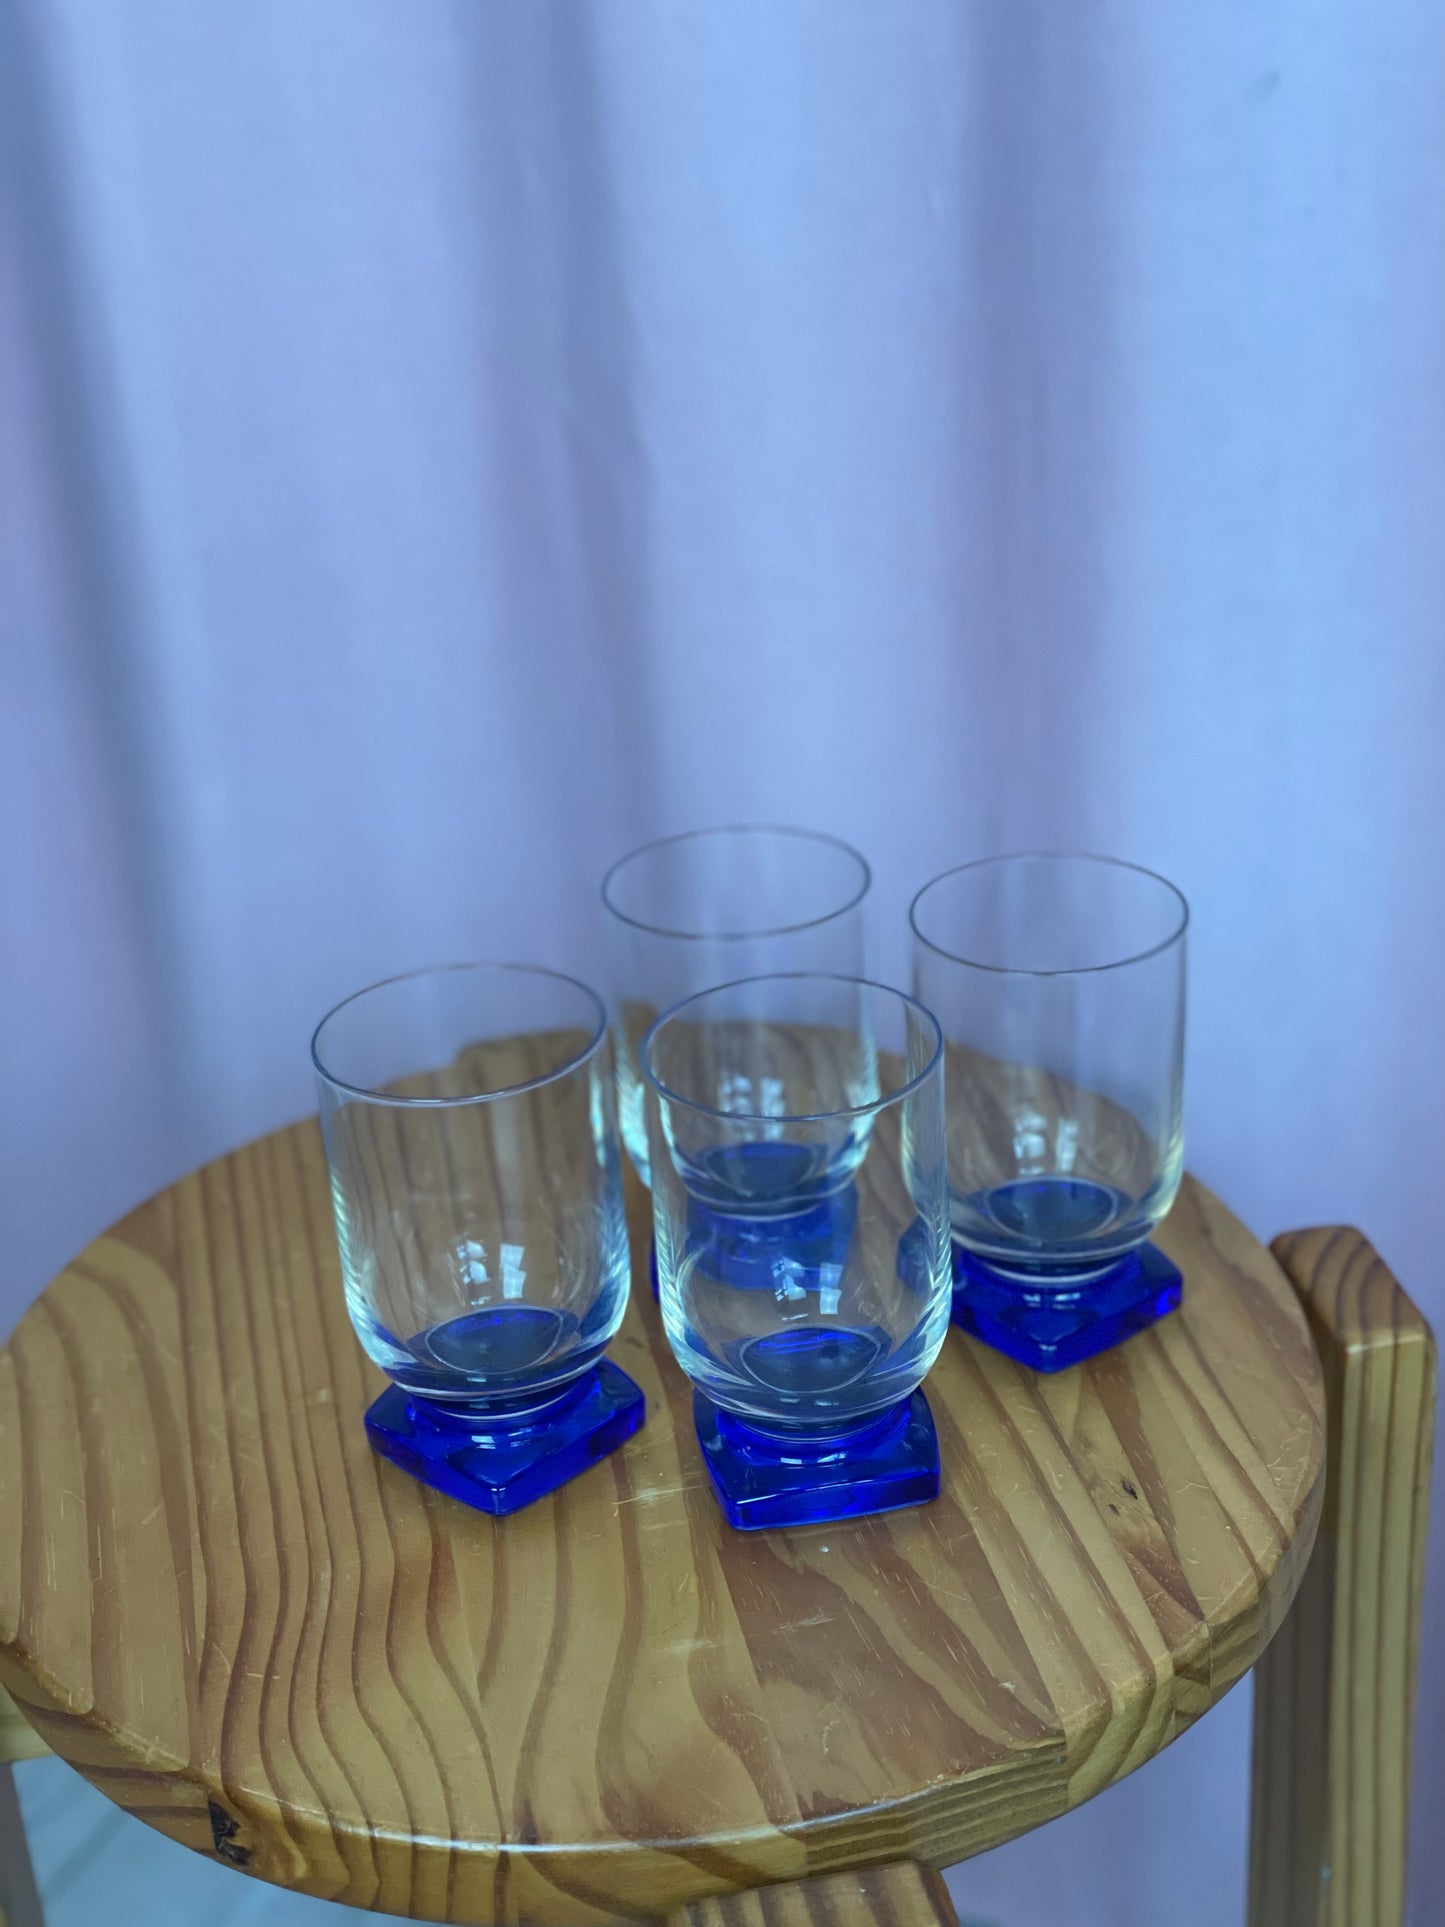 Water glass with blue square base